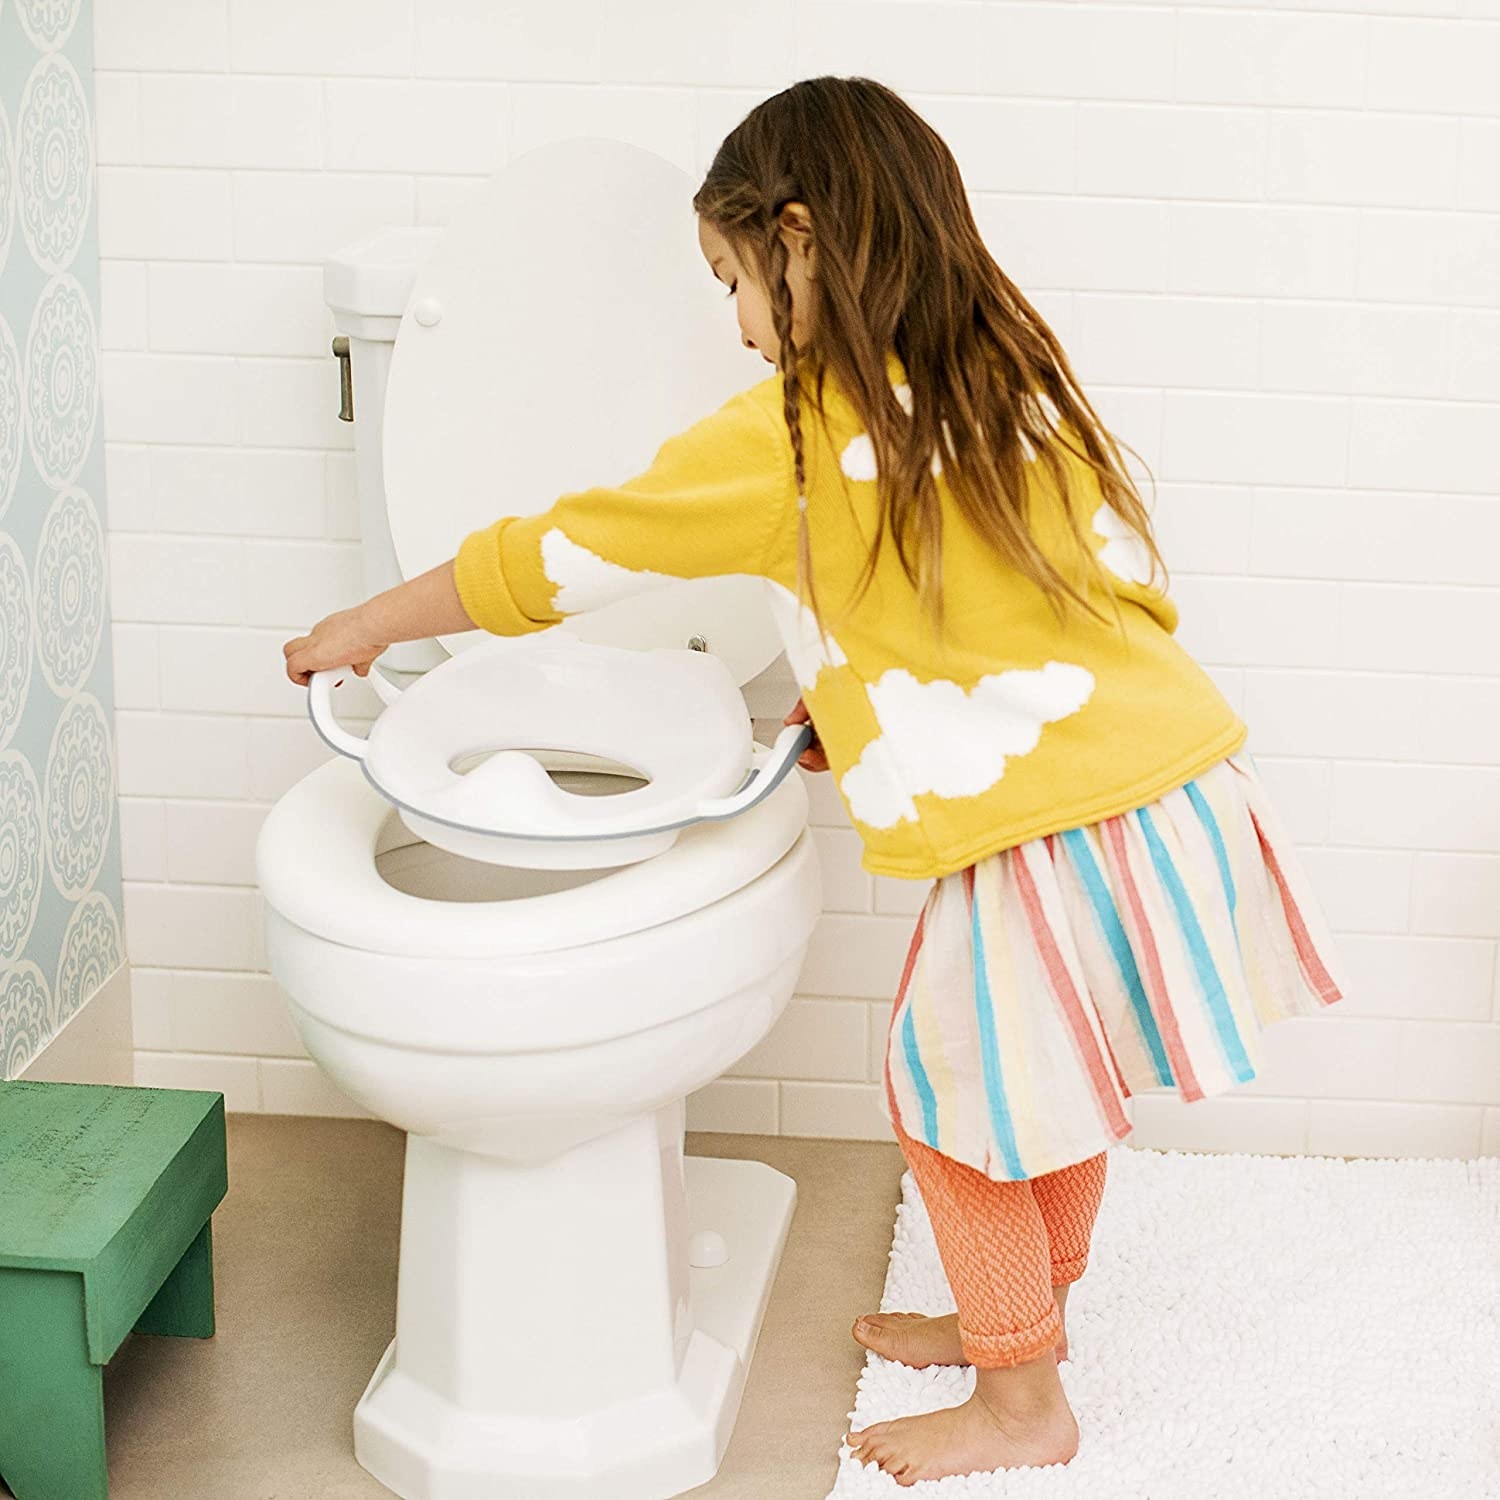 A kid placing the potty seat on the potty